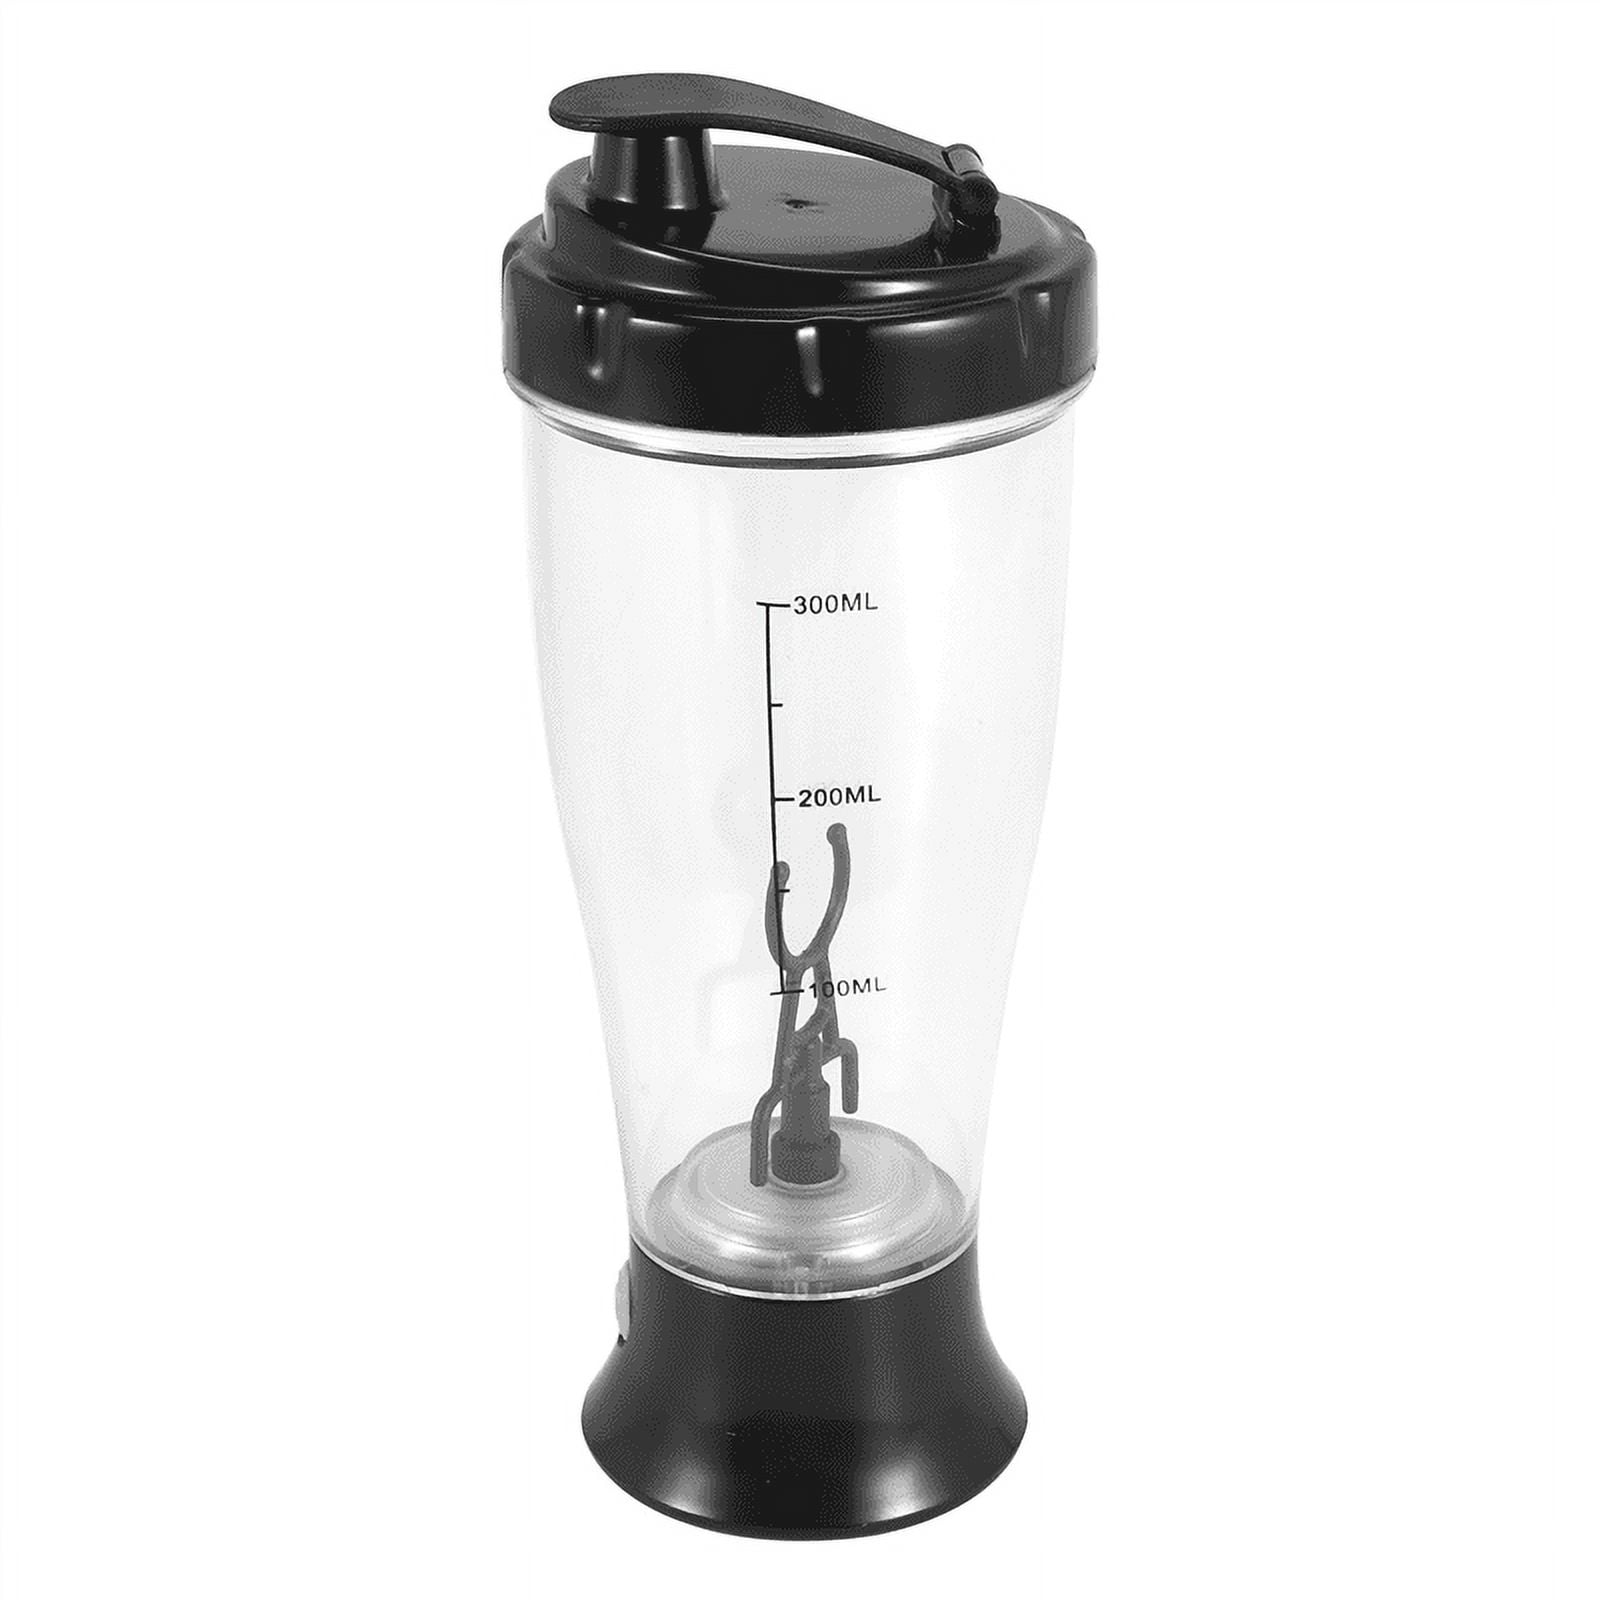 300ml Electric Protein Shaker Bottle, Automatic Self-stirring Portable  Fitness Mixer Cup, Powerful Features